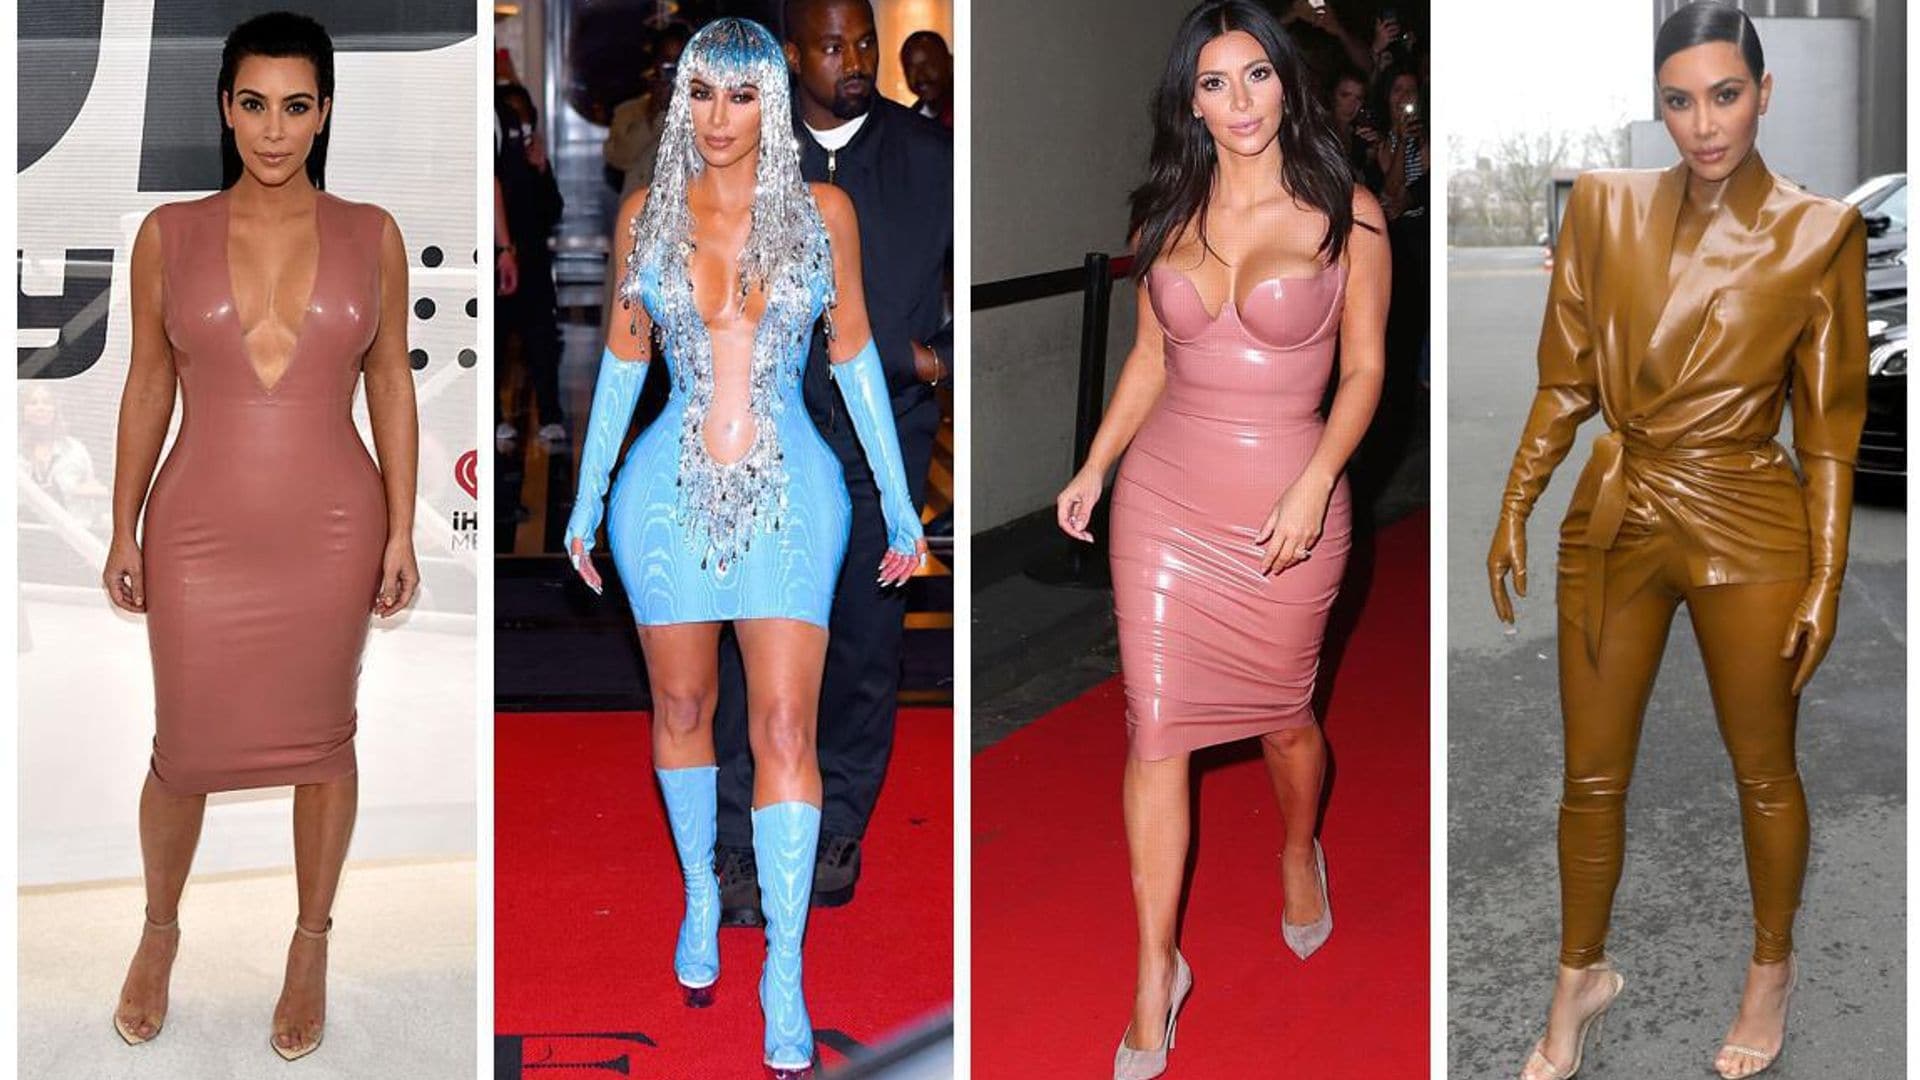 Kim Kardashian loves latex and is ahead of the fashion trends for spring/summer 2020